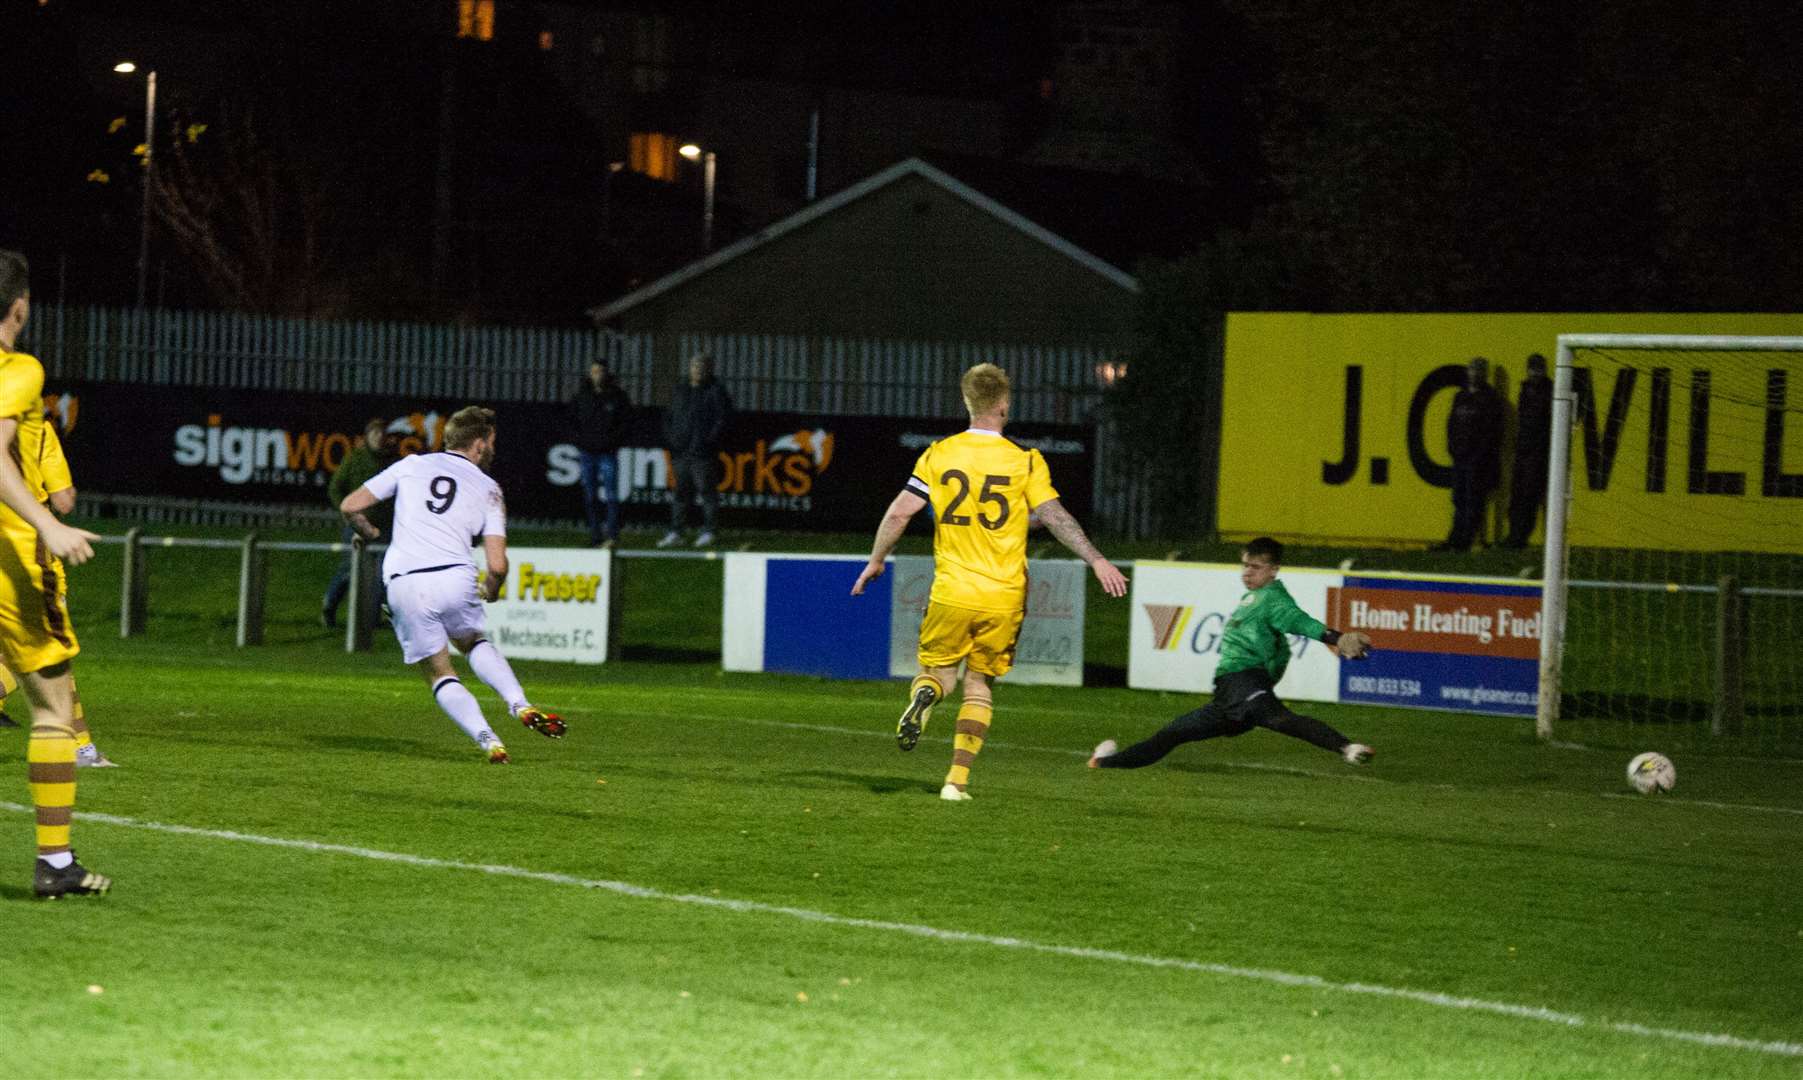 Gary Kerr races through on goal and slots away to make it 2-0 to Rothes. Picture: Becky Saunderson